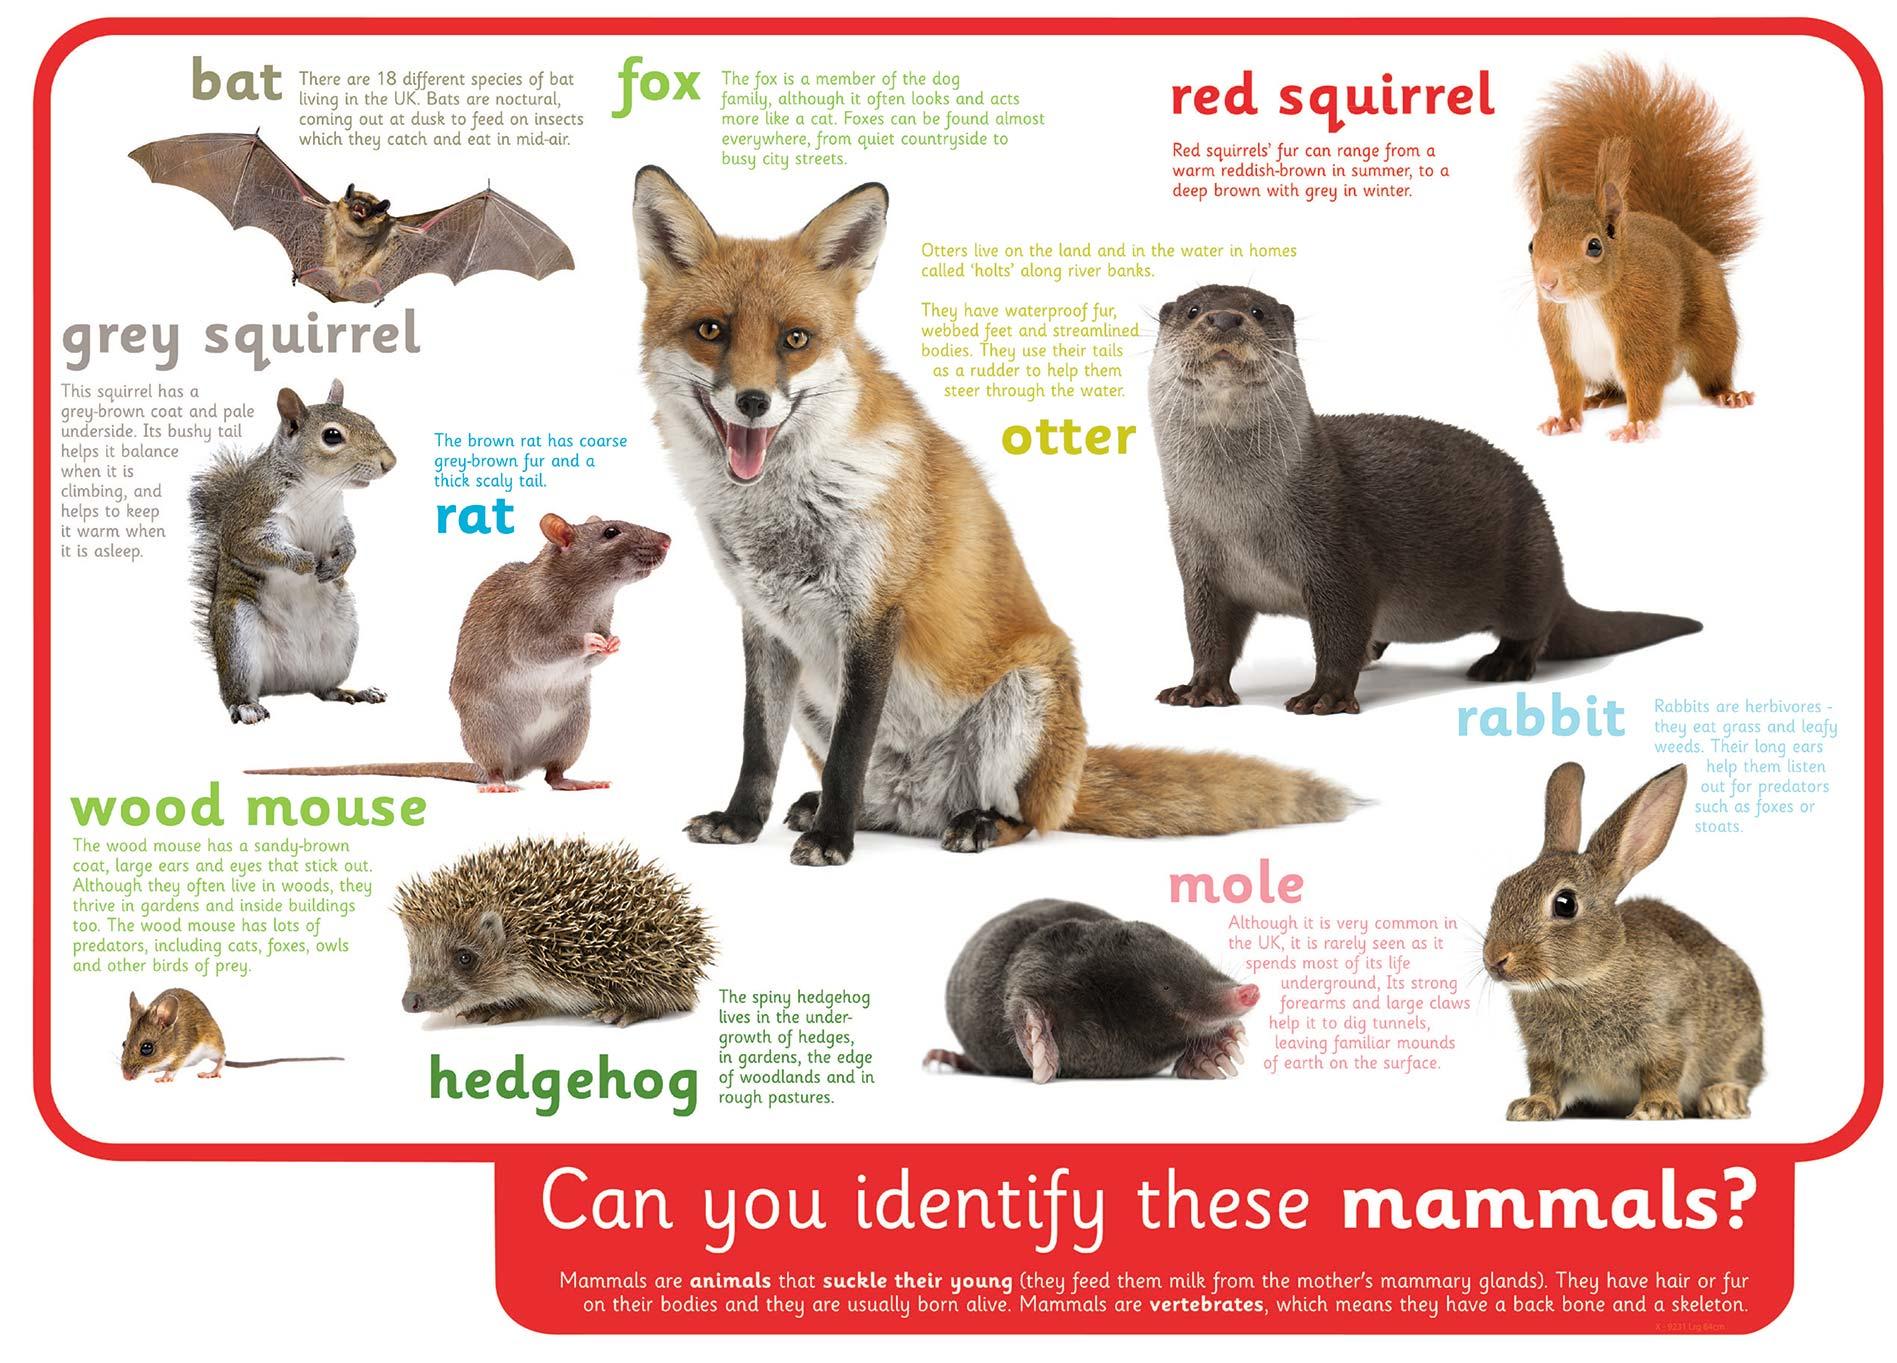 Can you identify these mammals?